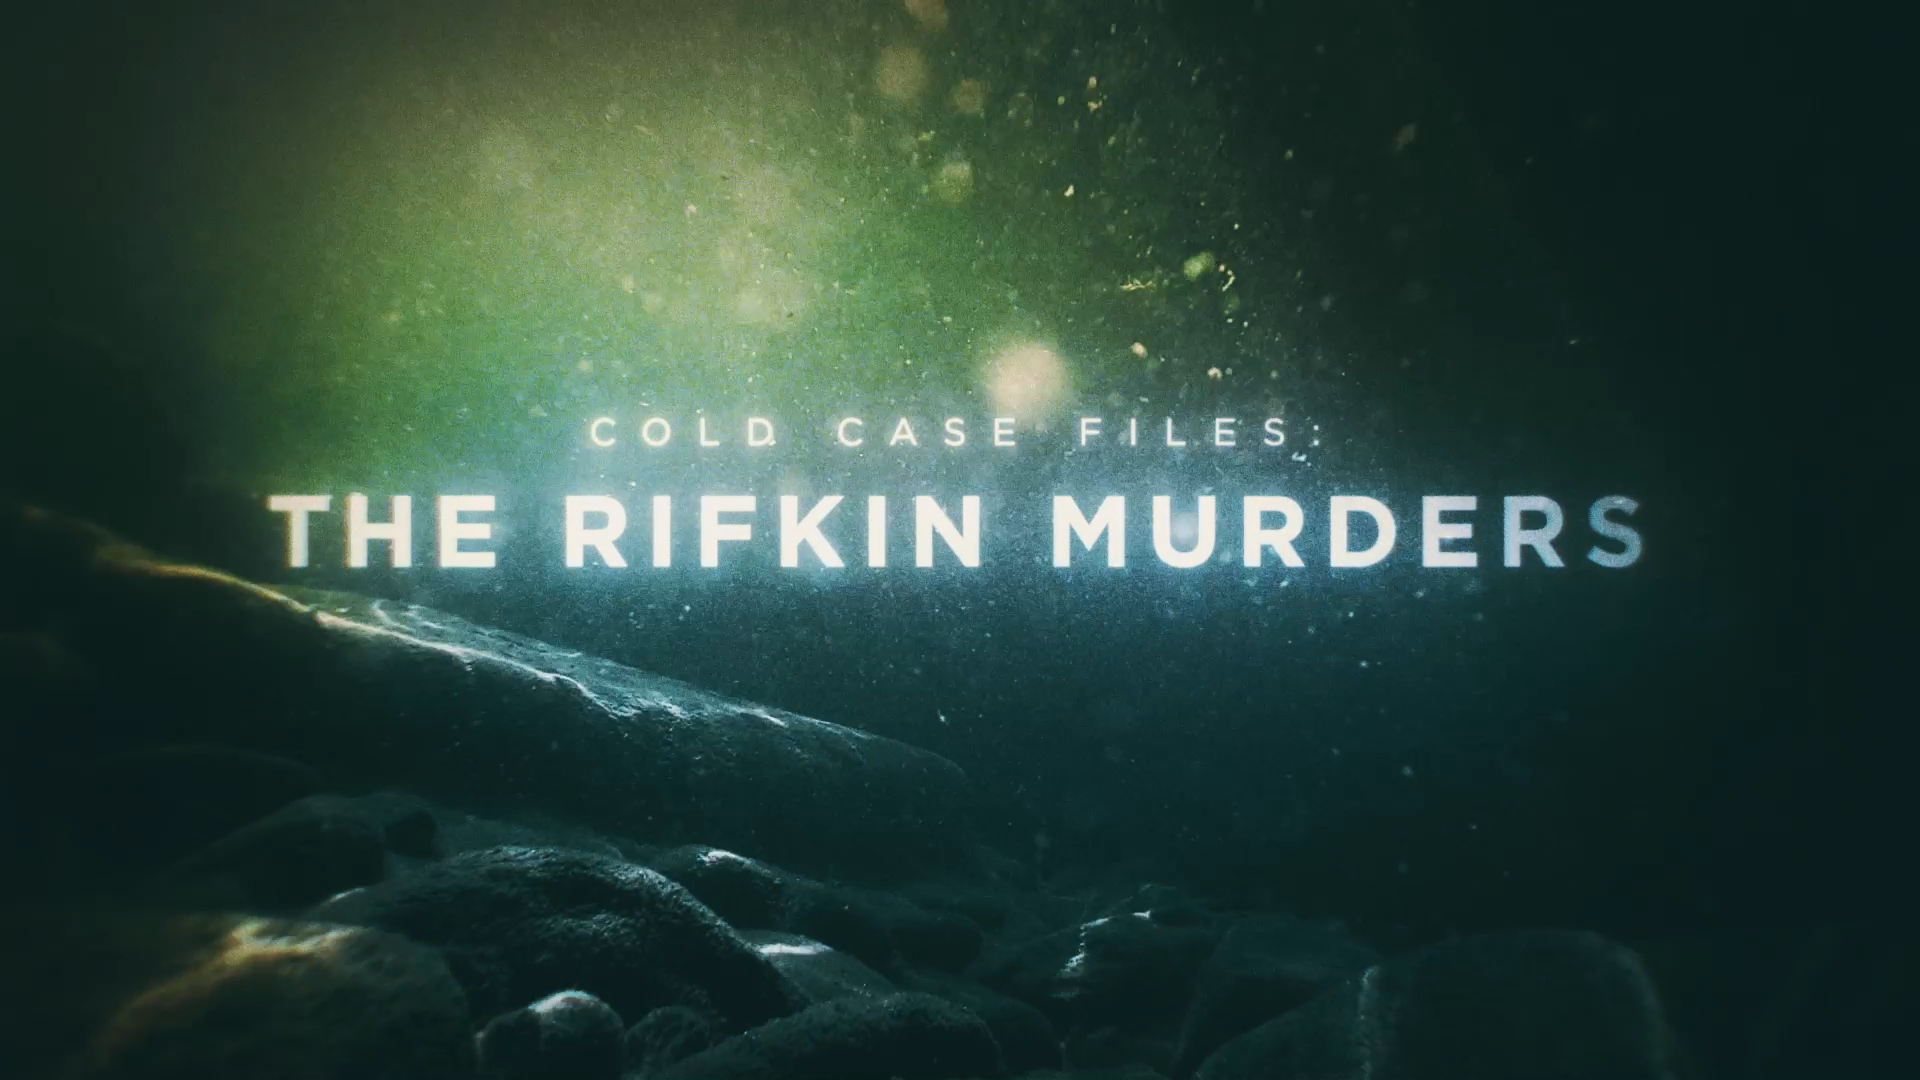 Cold Case Files: The Rifkin Murders